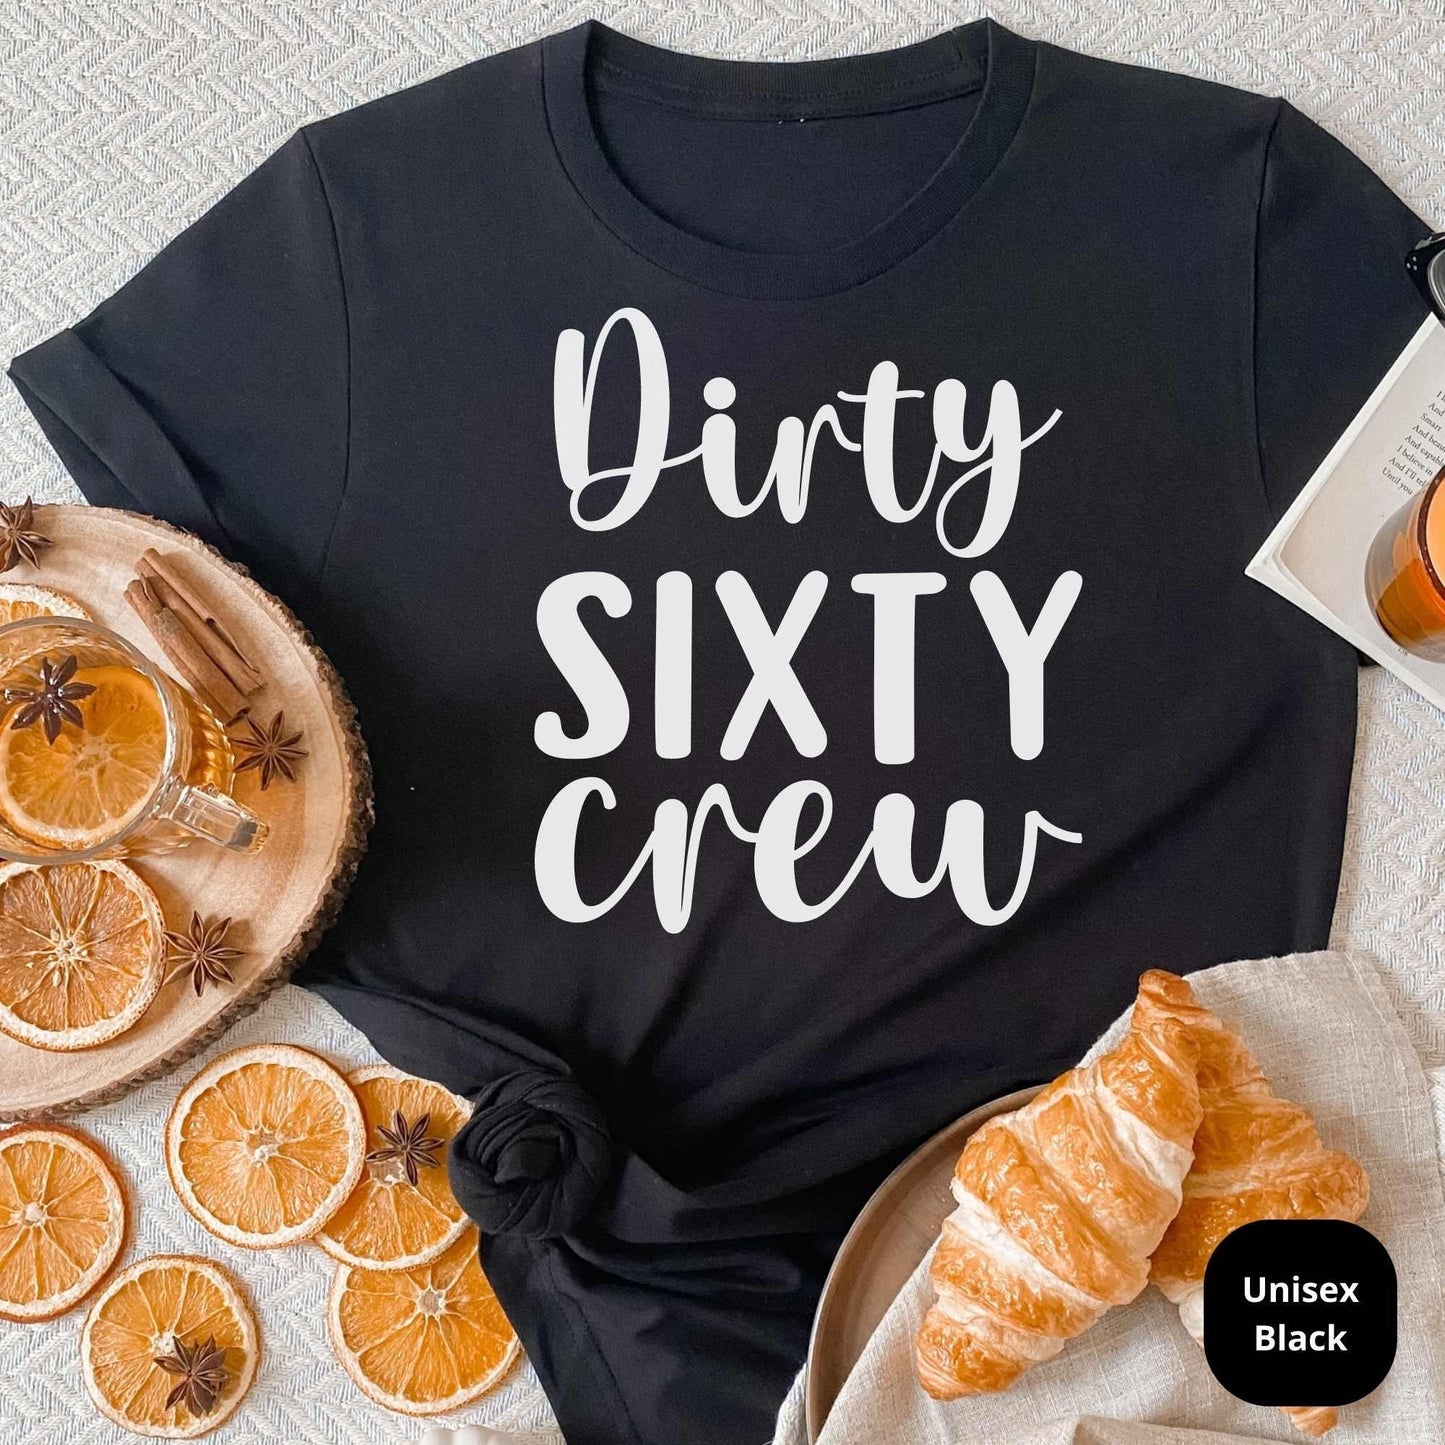 60th Birthday Crew Shirt, 60th Birthday Gift, Great for Grand Parents, Mom, Dad, Aunt, Cousins & Loved Ones Bday or Anniversary Celebration HMDesignStudioUS